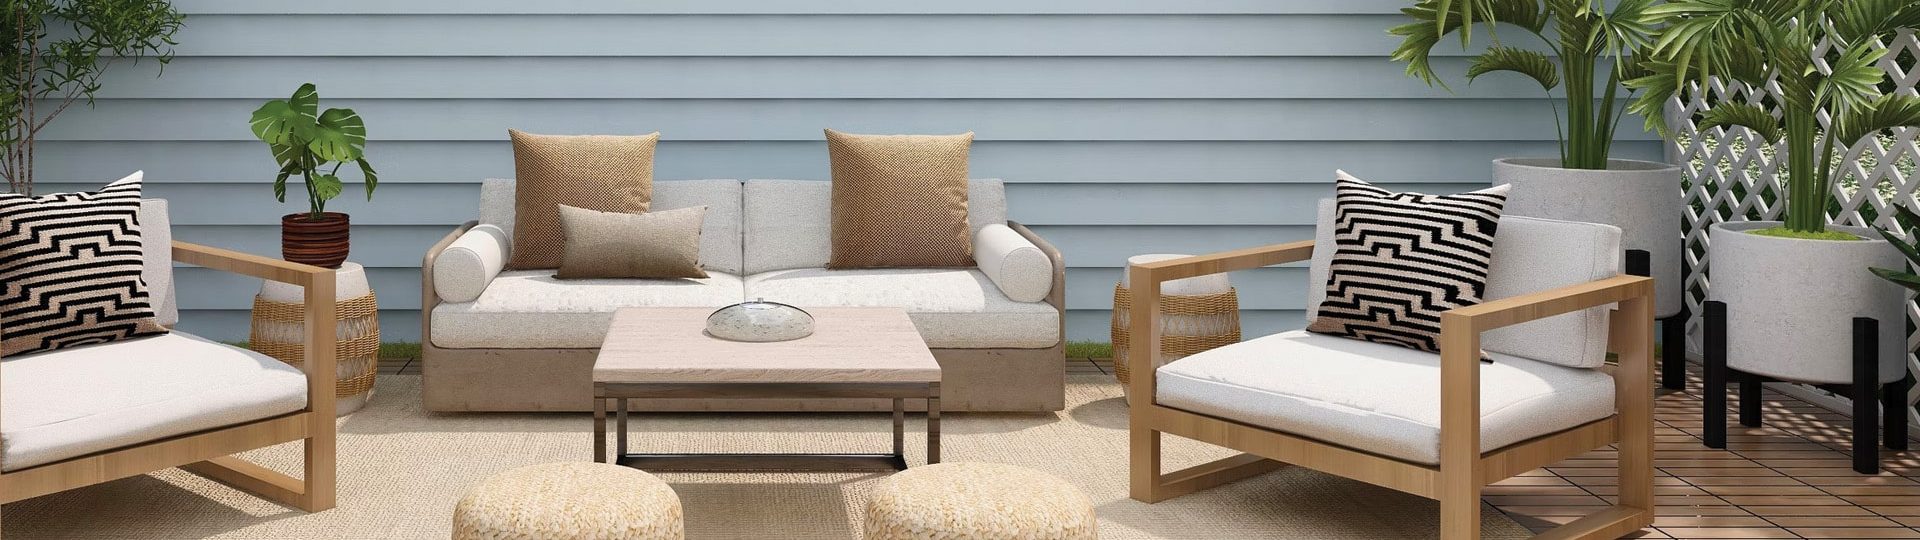 Bring the Scandinavian design to your outdoor space